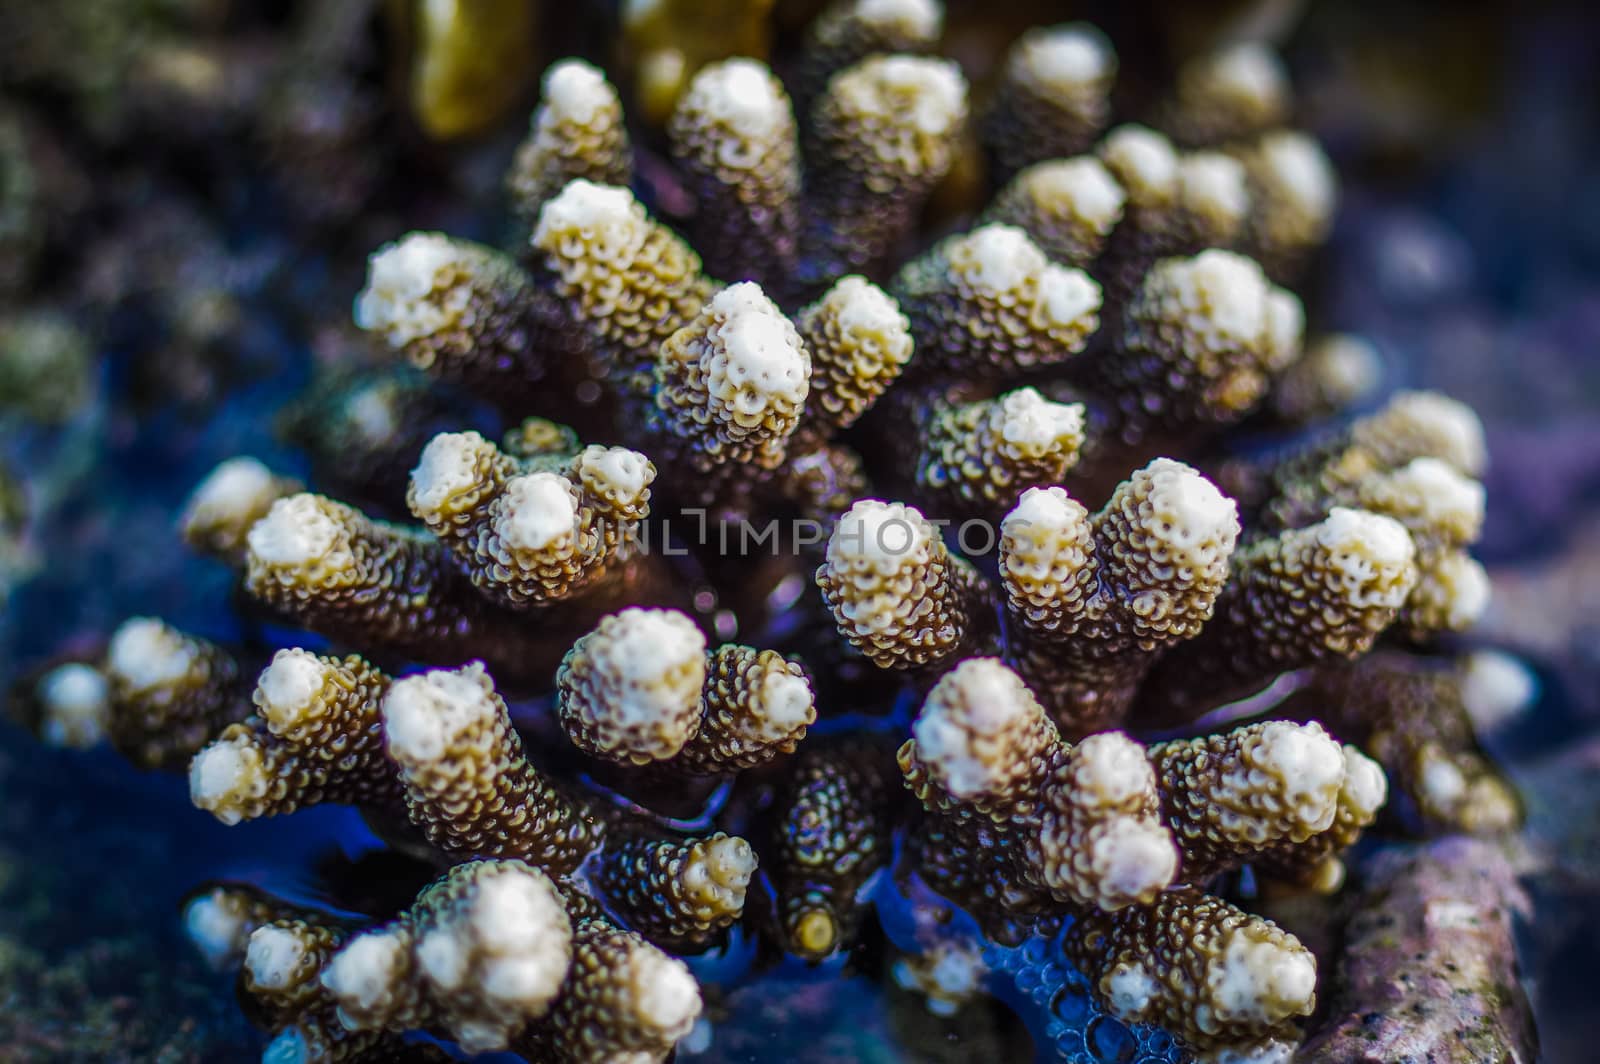 The Andaman sea at low tide, Coral at sunny day with water around it. blurry. Phuket Island, Thailand, Asia